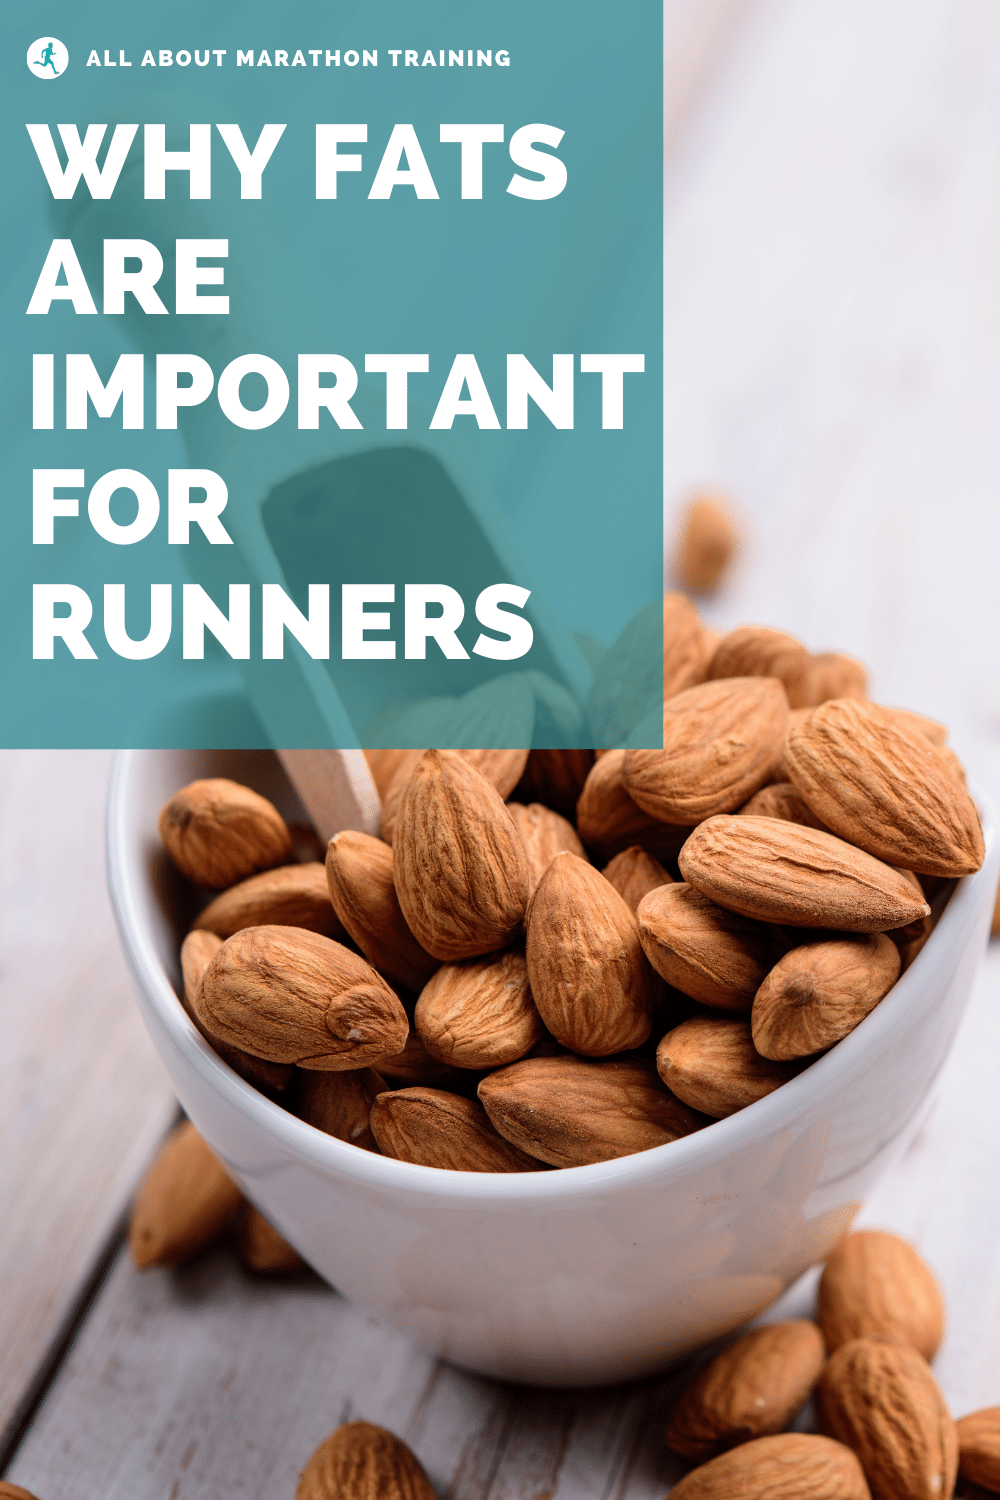 I. Introduction: The Importance of Fat in a Runner's Diet